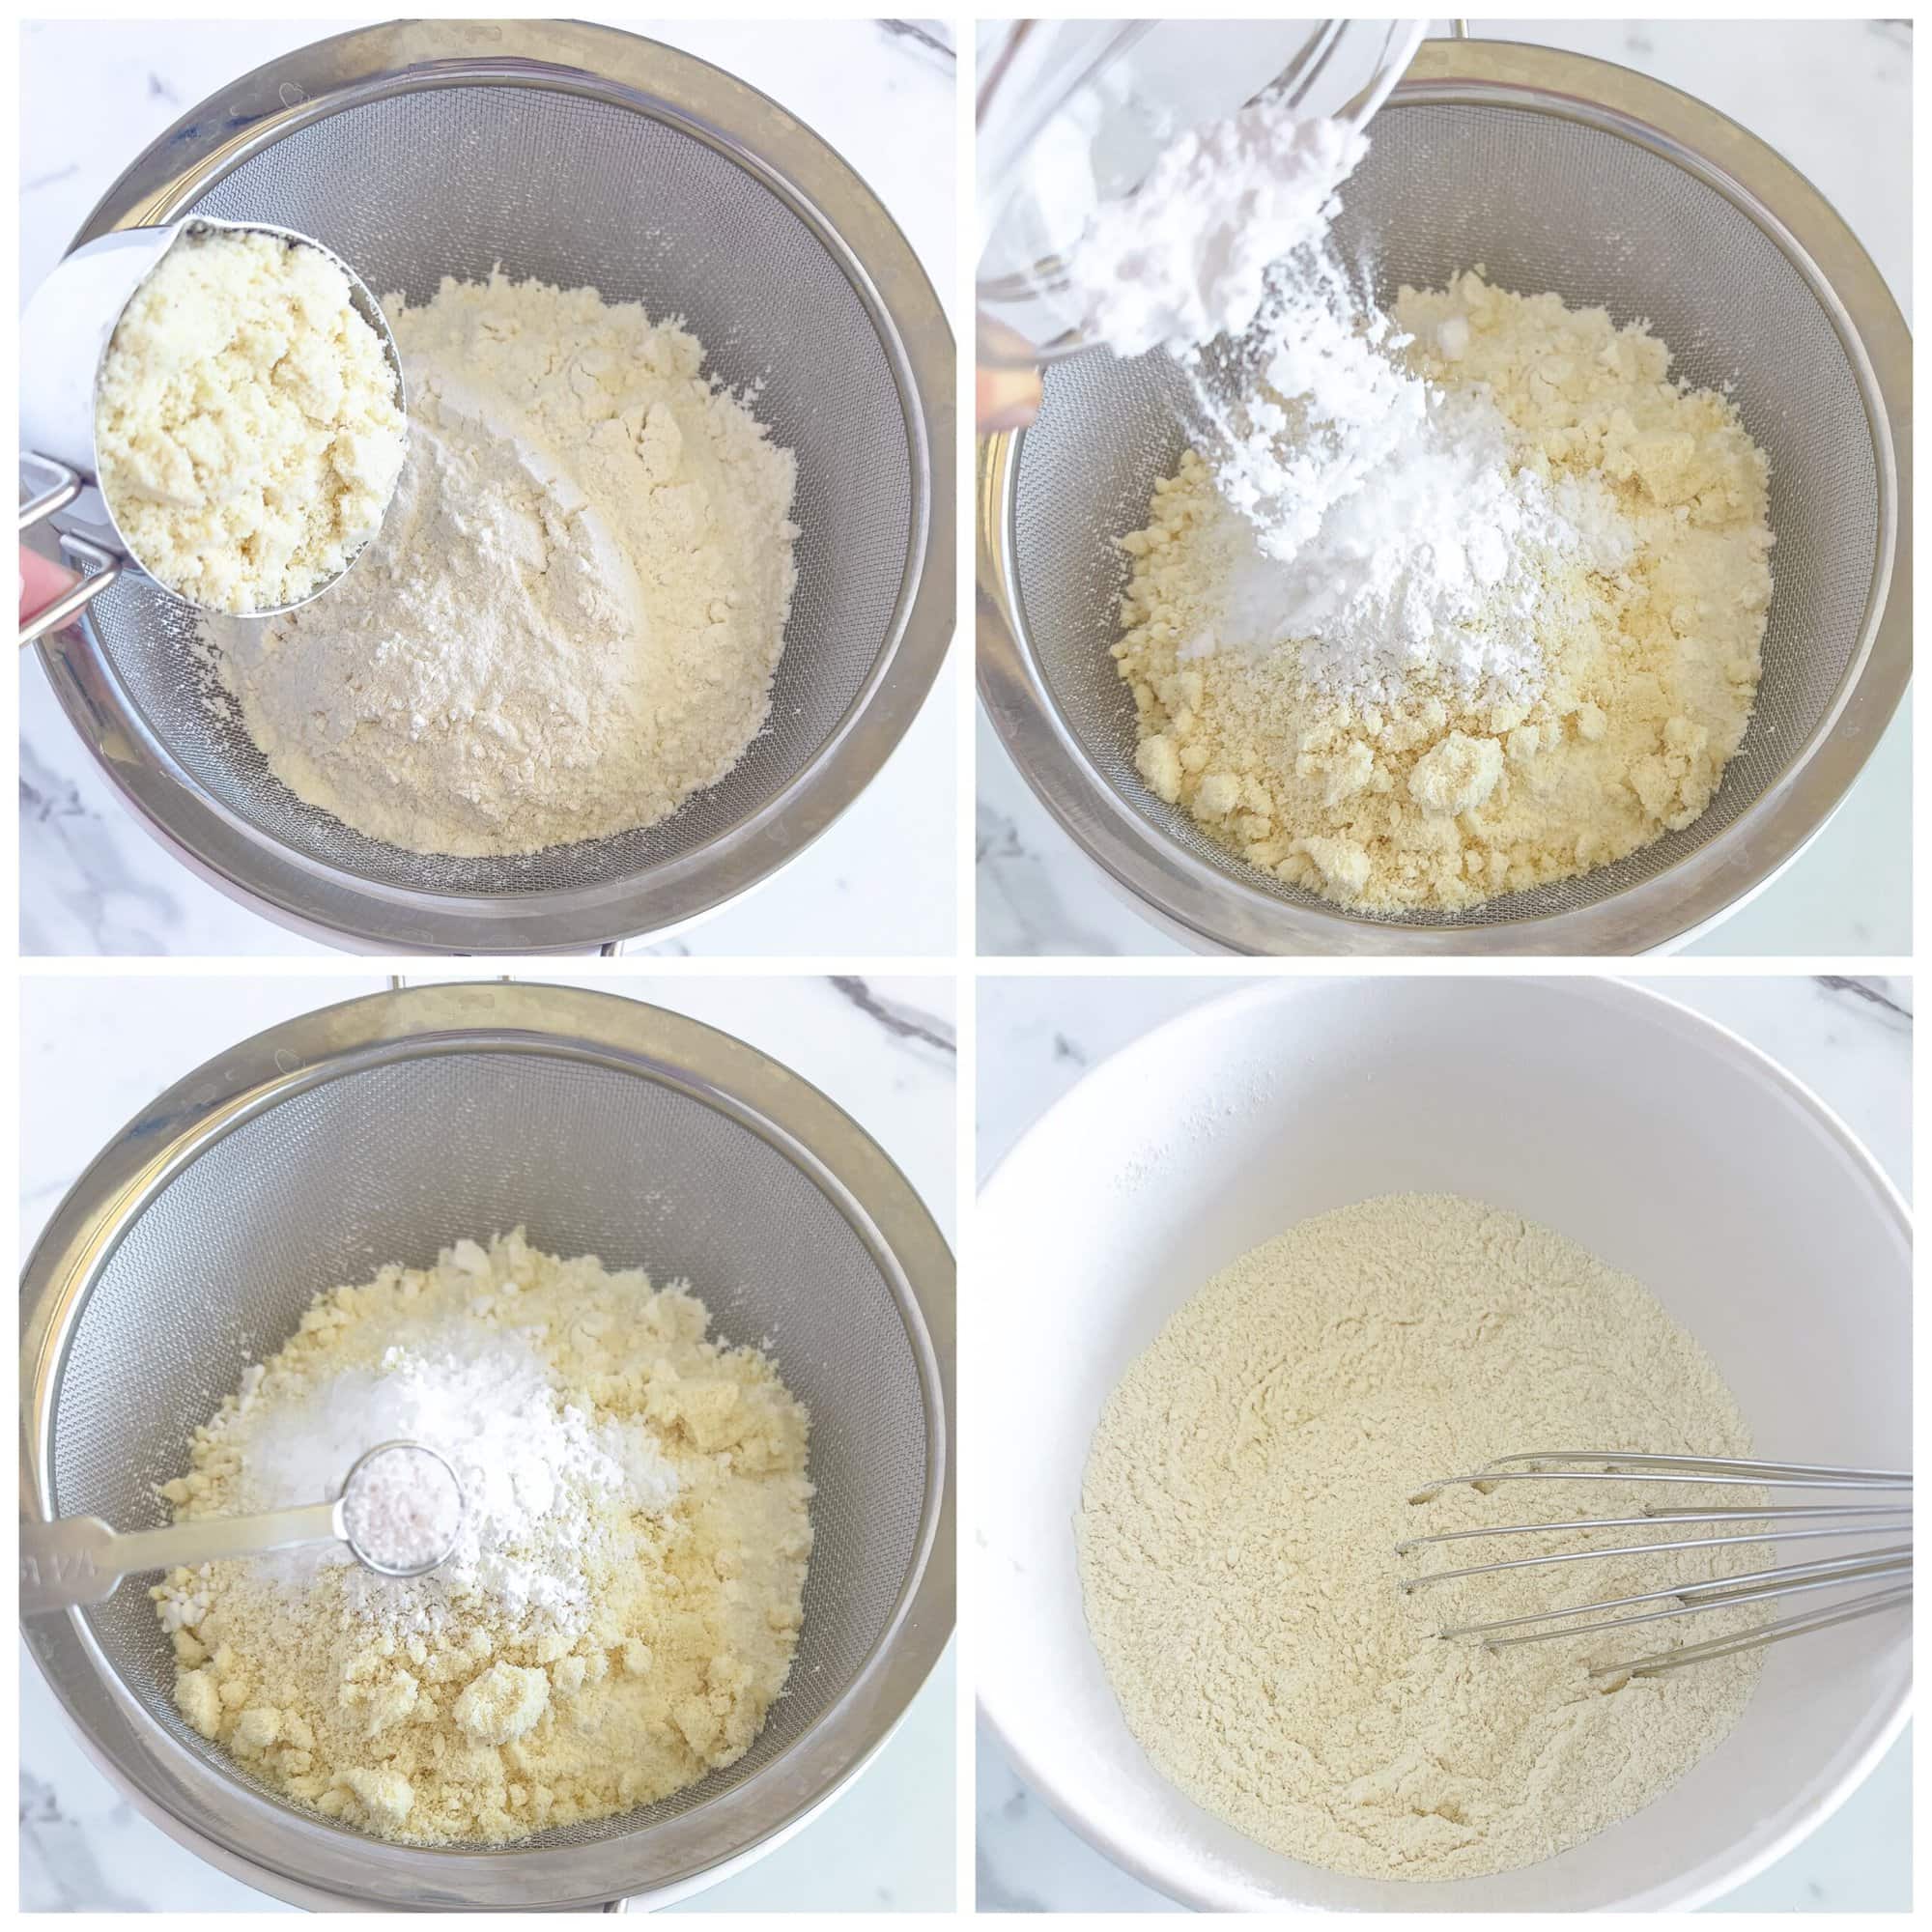 Start by carefully measuring all the dry components. This includes all-purpose flour, almond flour, baking soda, baking powder, and a pinch of sea salt.